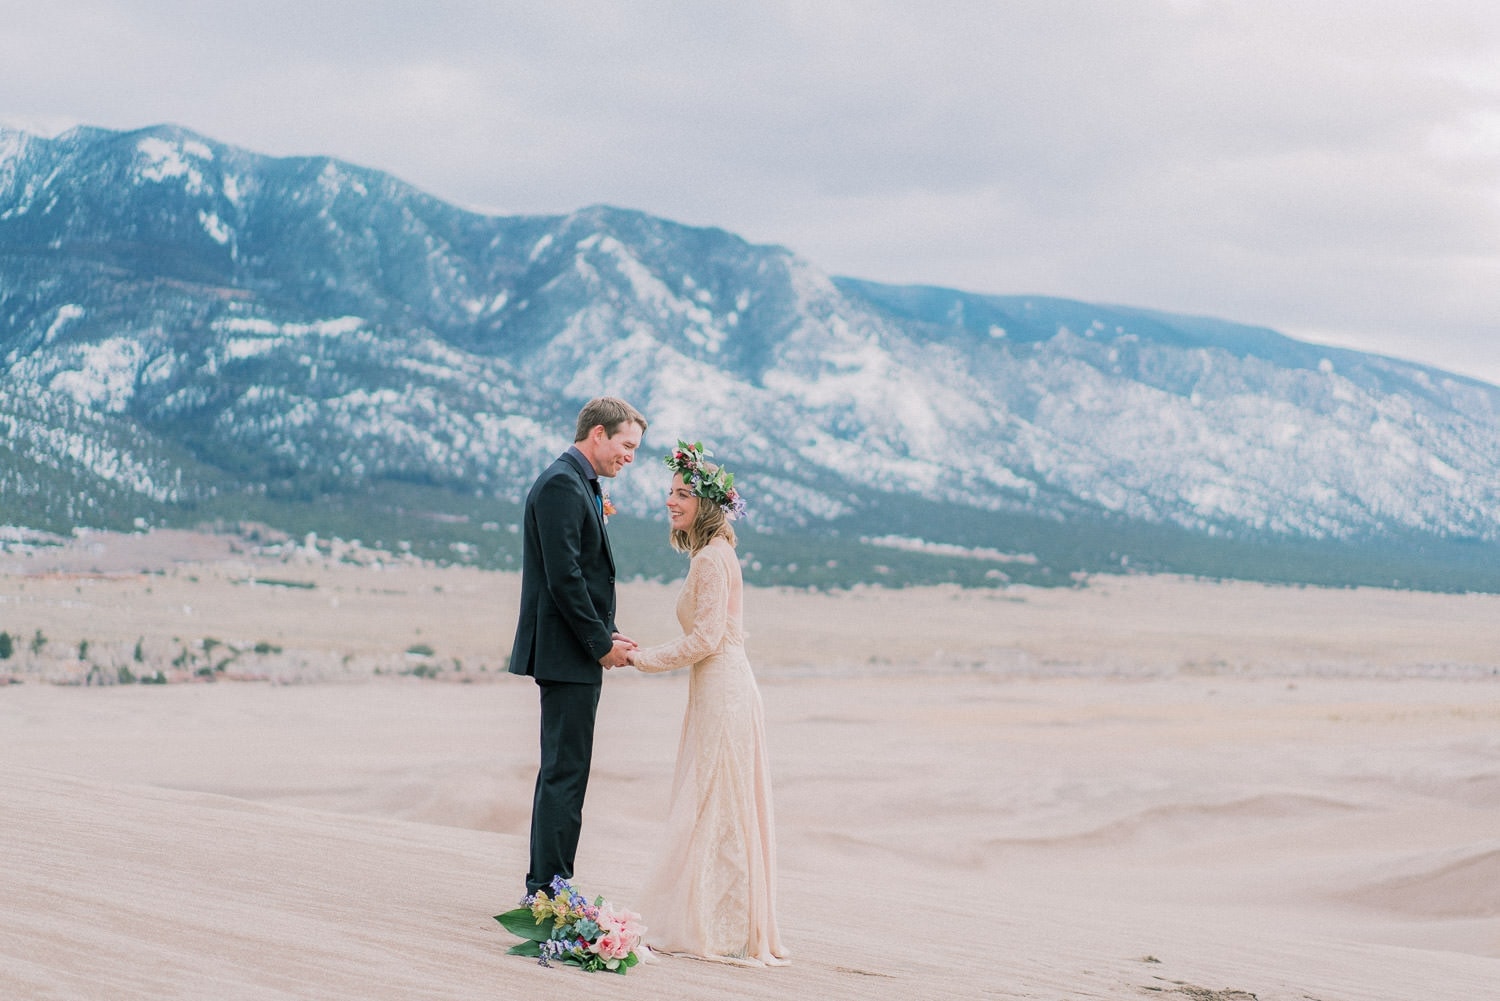 Can You Officiate Your Own Wedding In Colorado Getting Married In Colorado What You Need To Know About Marriage Licenses Self Solemnization